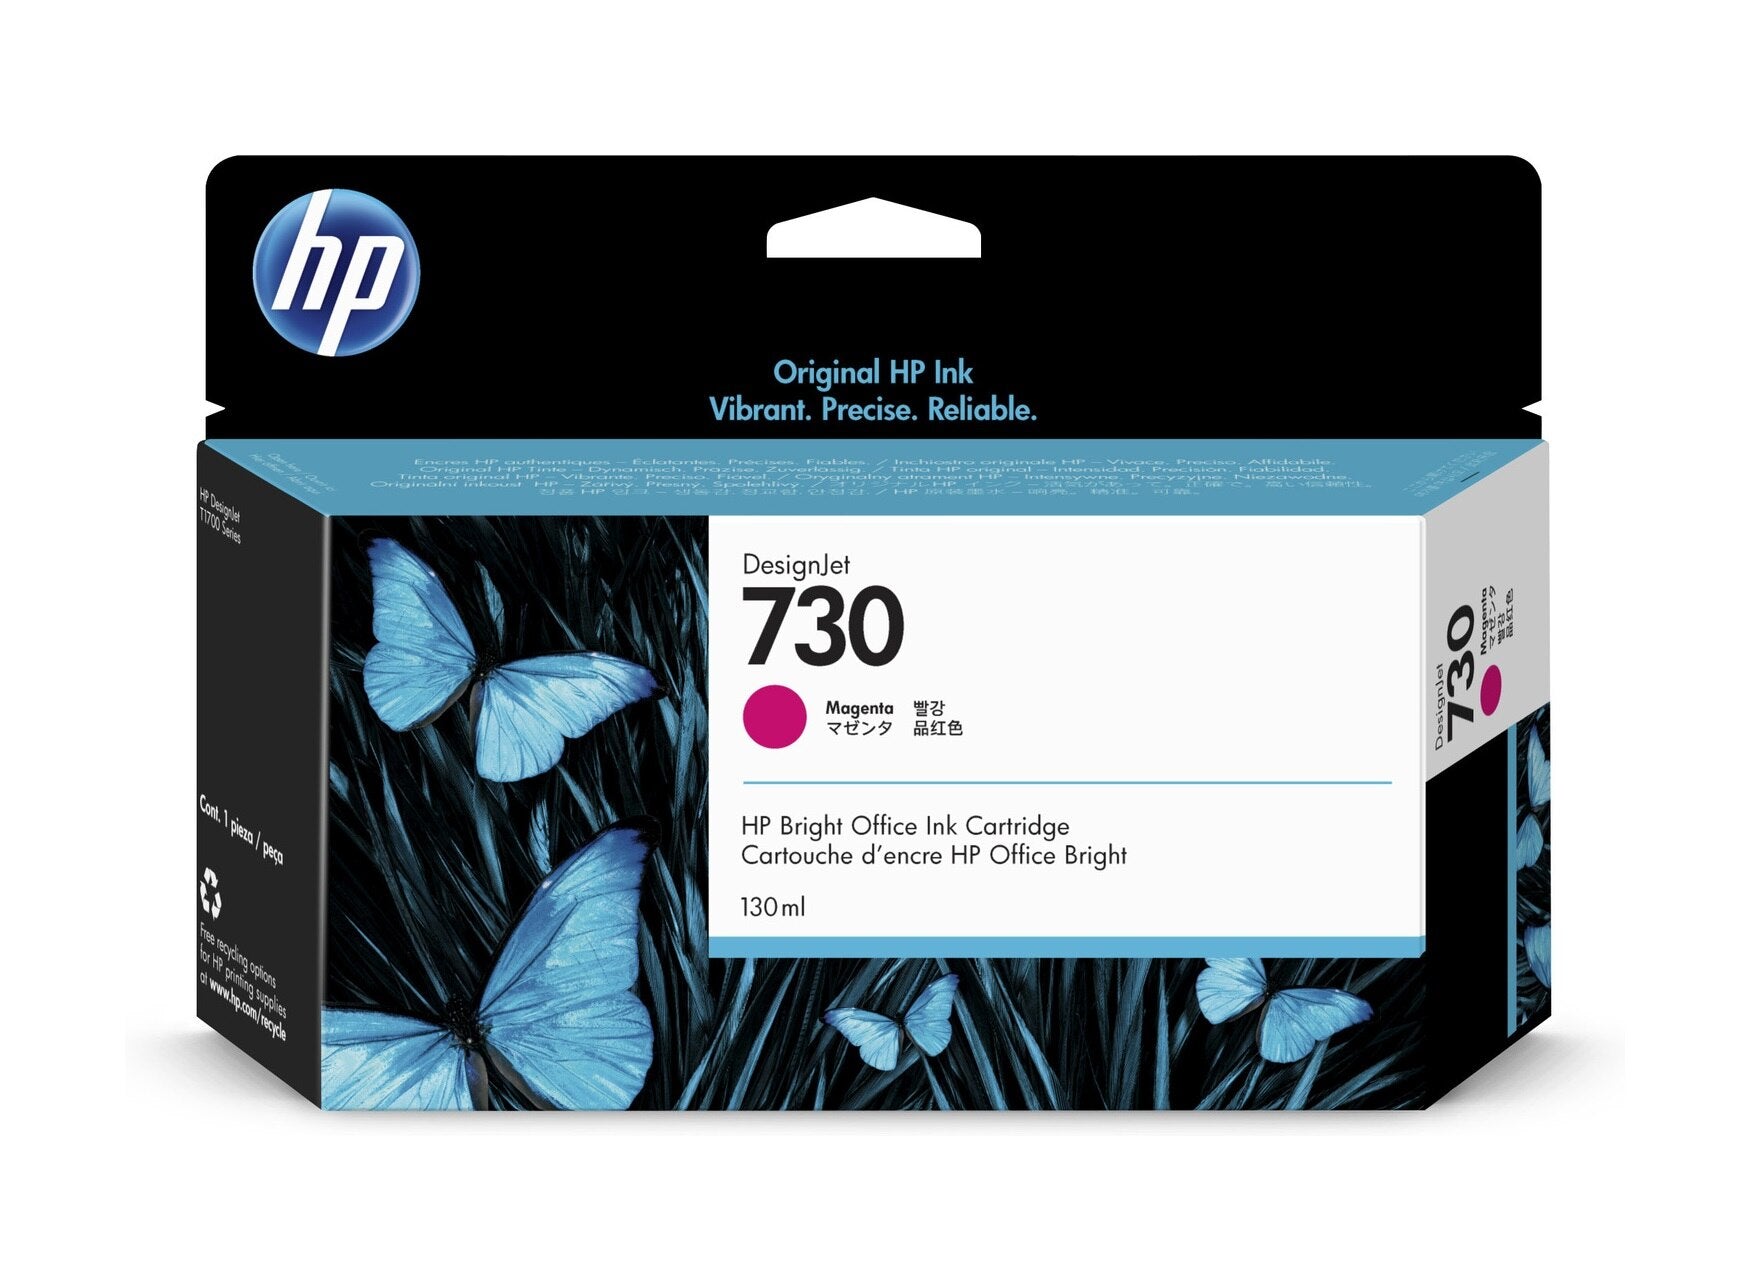 HP 730 - 130ml Ink Cartridge for HP Designjet T1600 T1700 and T2600 Plotters